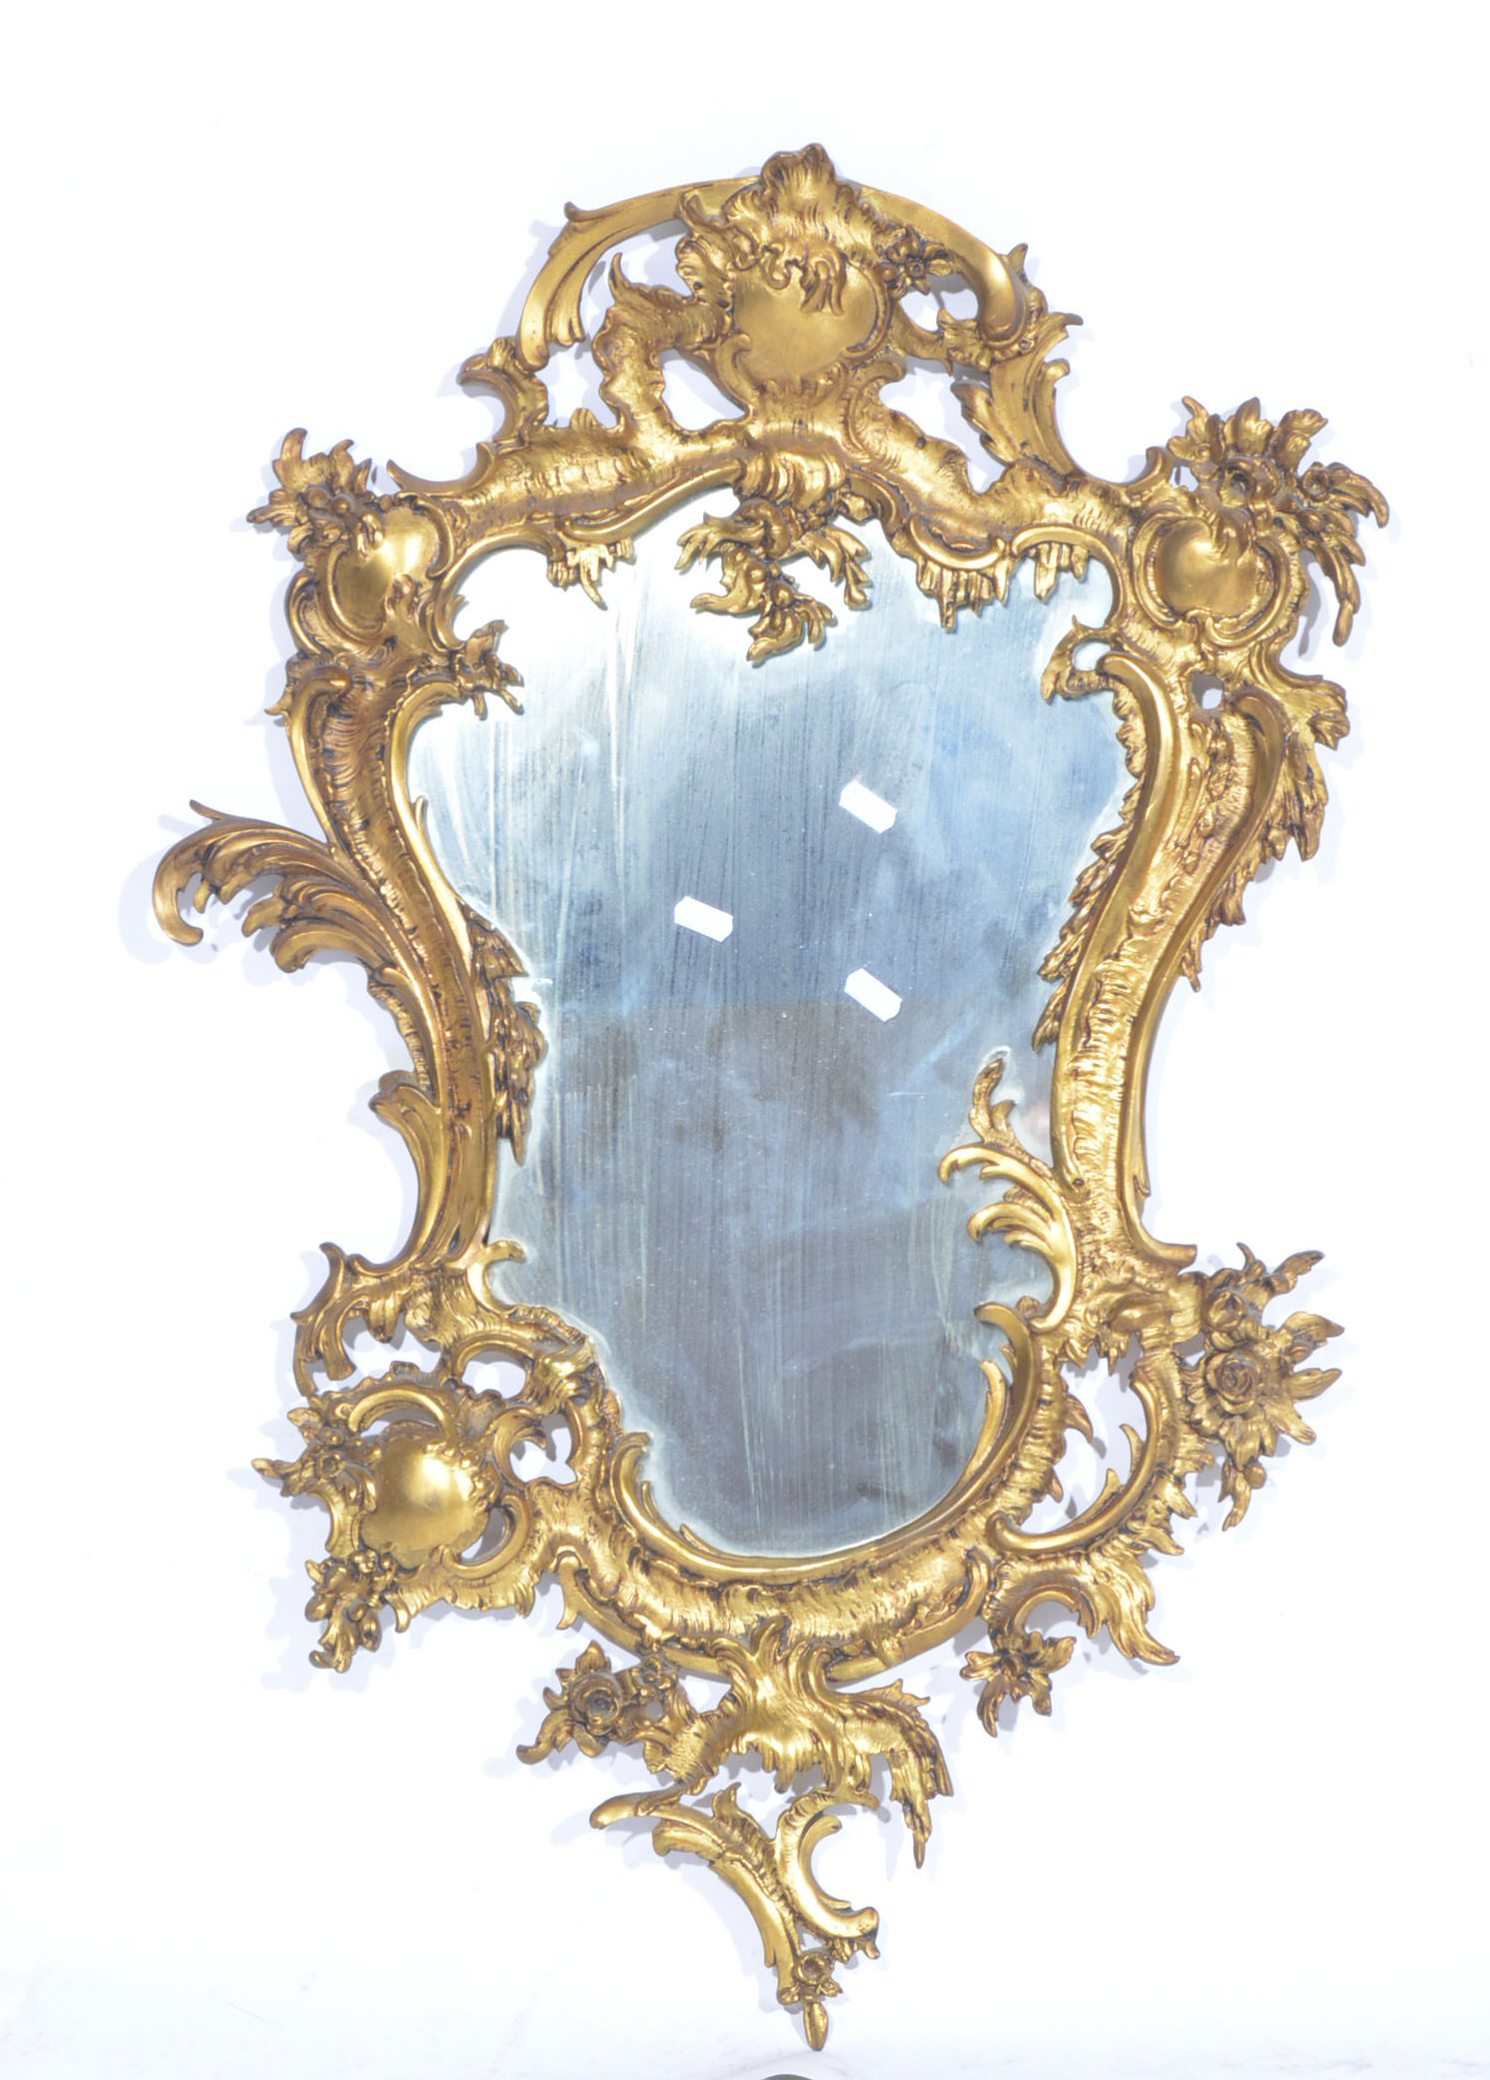 French Rococo style mirror, cast and gilt metal frame, shield-shaped plate, 83cm. - Image 2 of 2